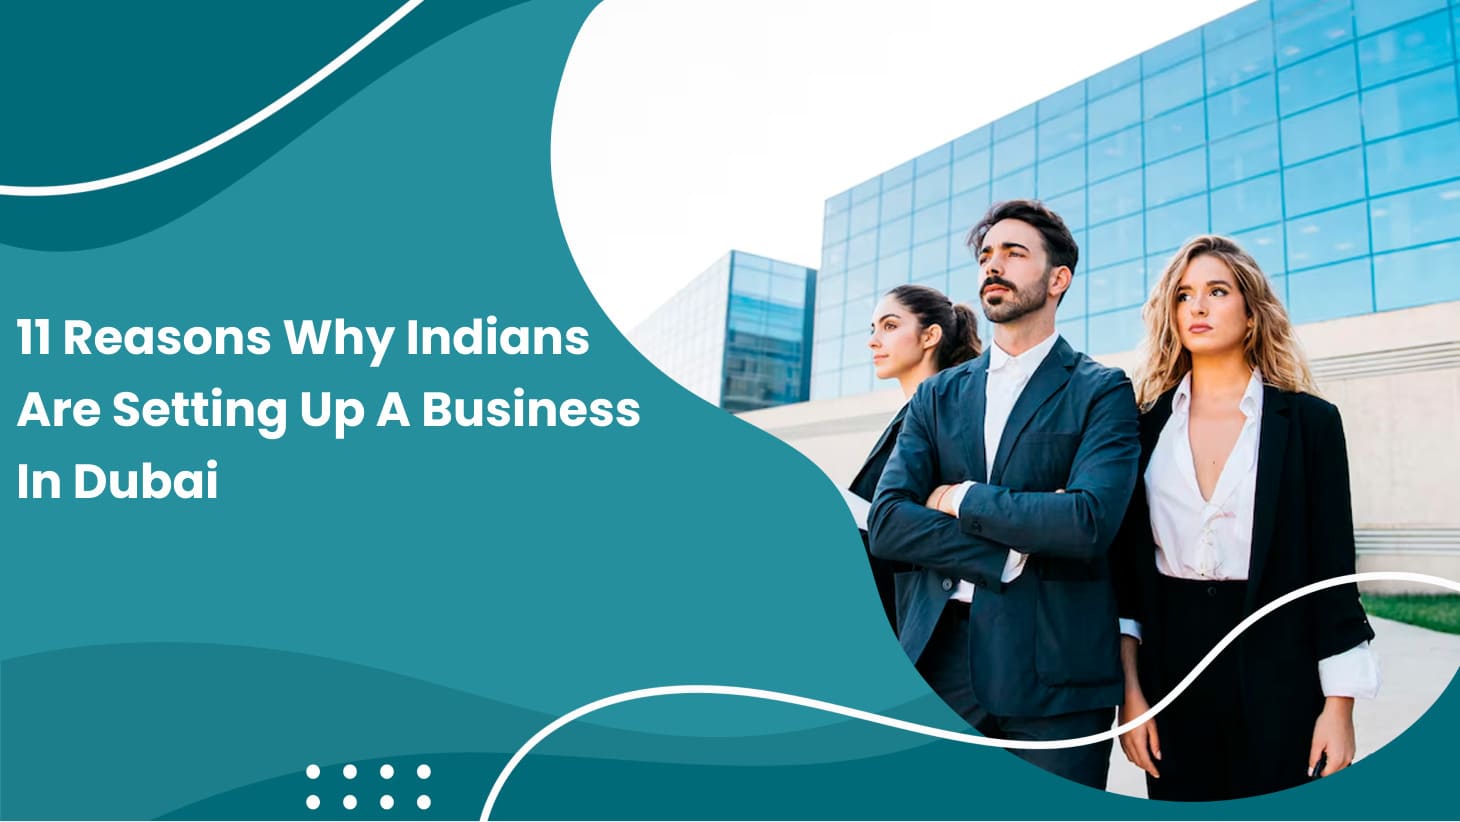 11 Reasons Why Indians Are Setting Up A Business In Dubai